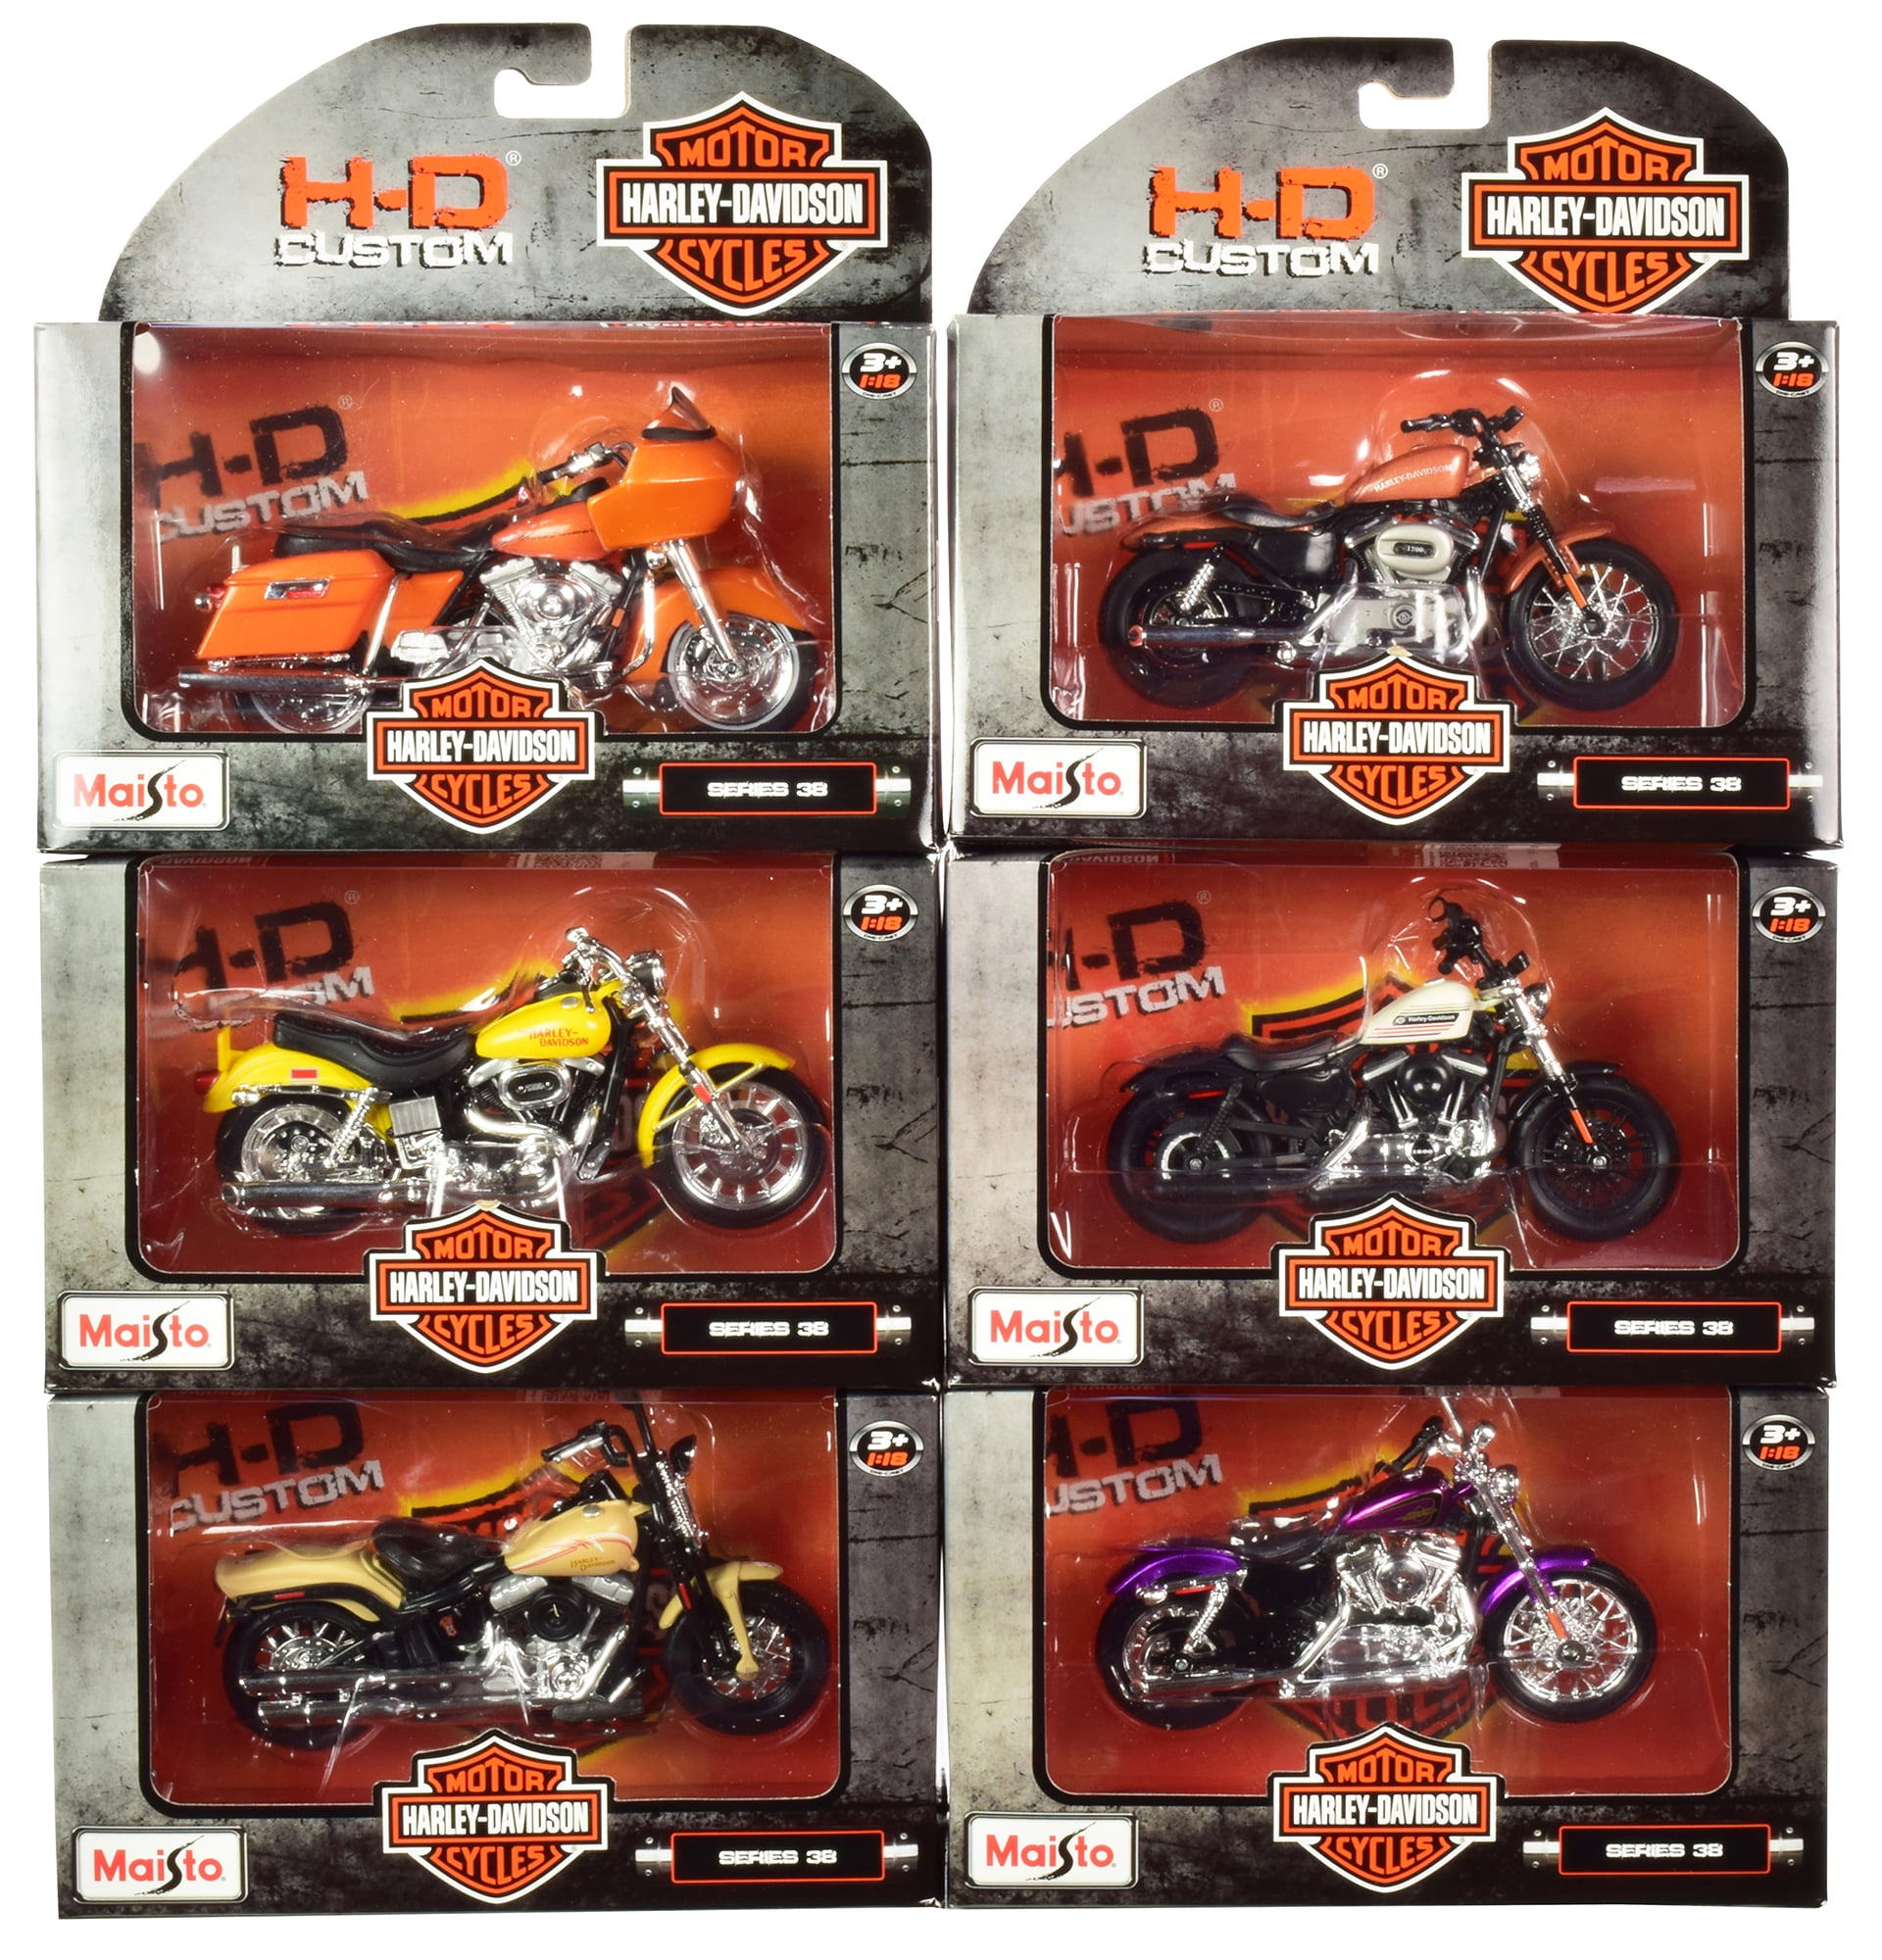 Toy Motorcycle Walmart Promotion Off65